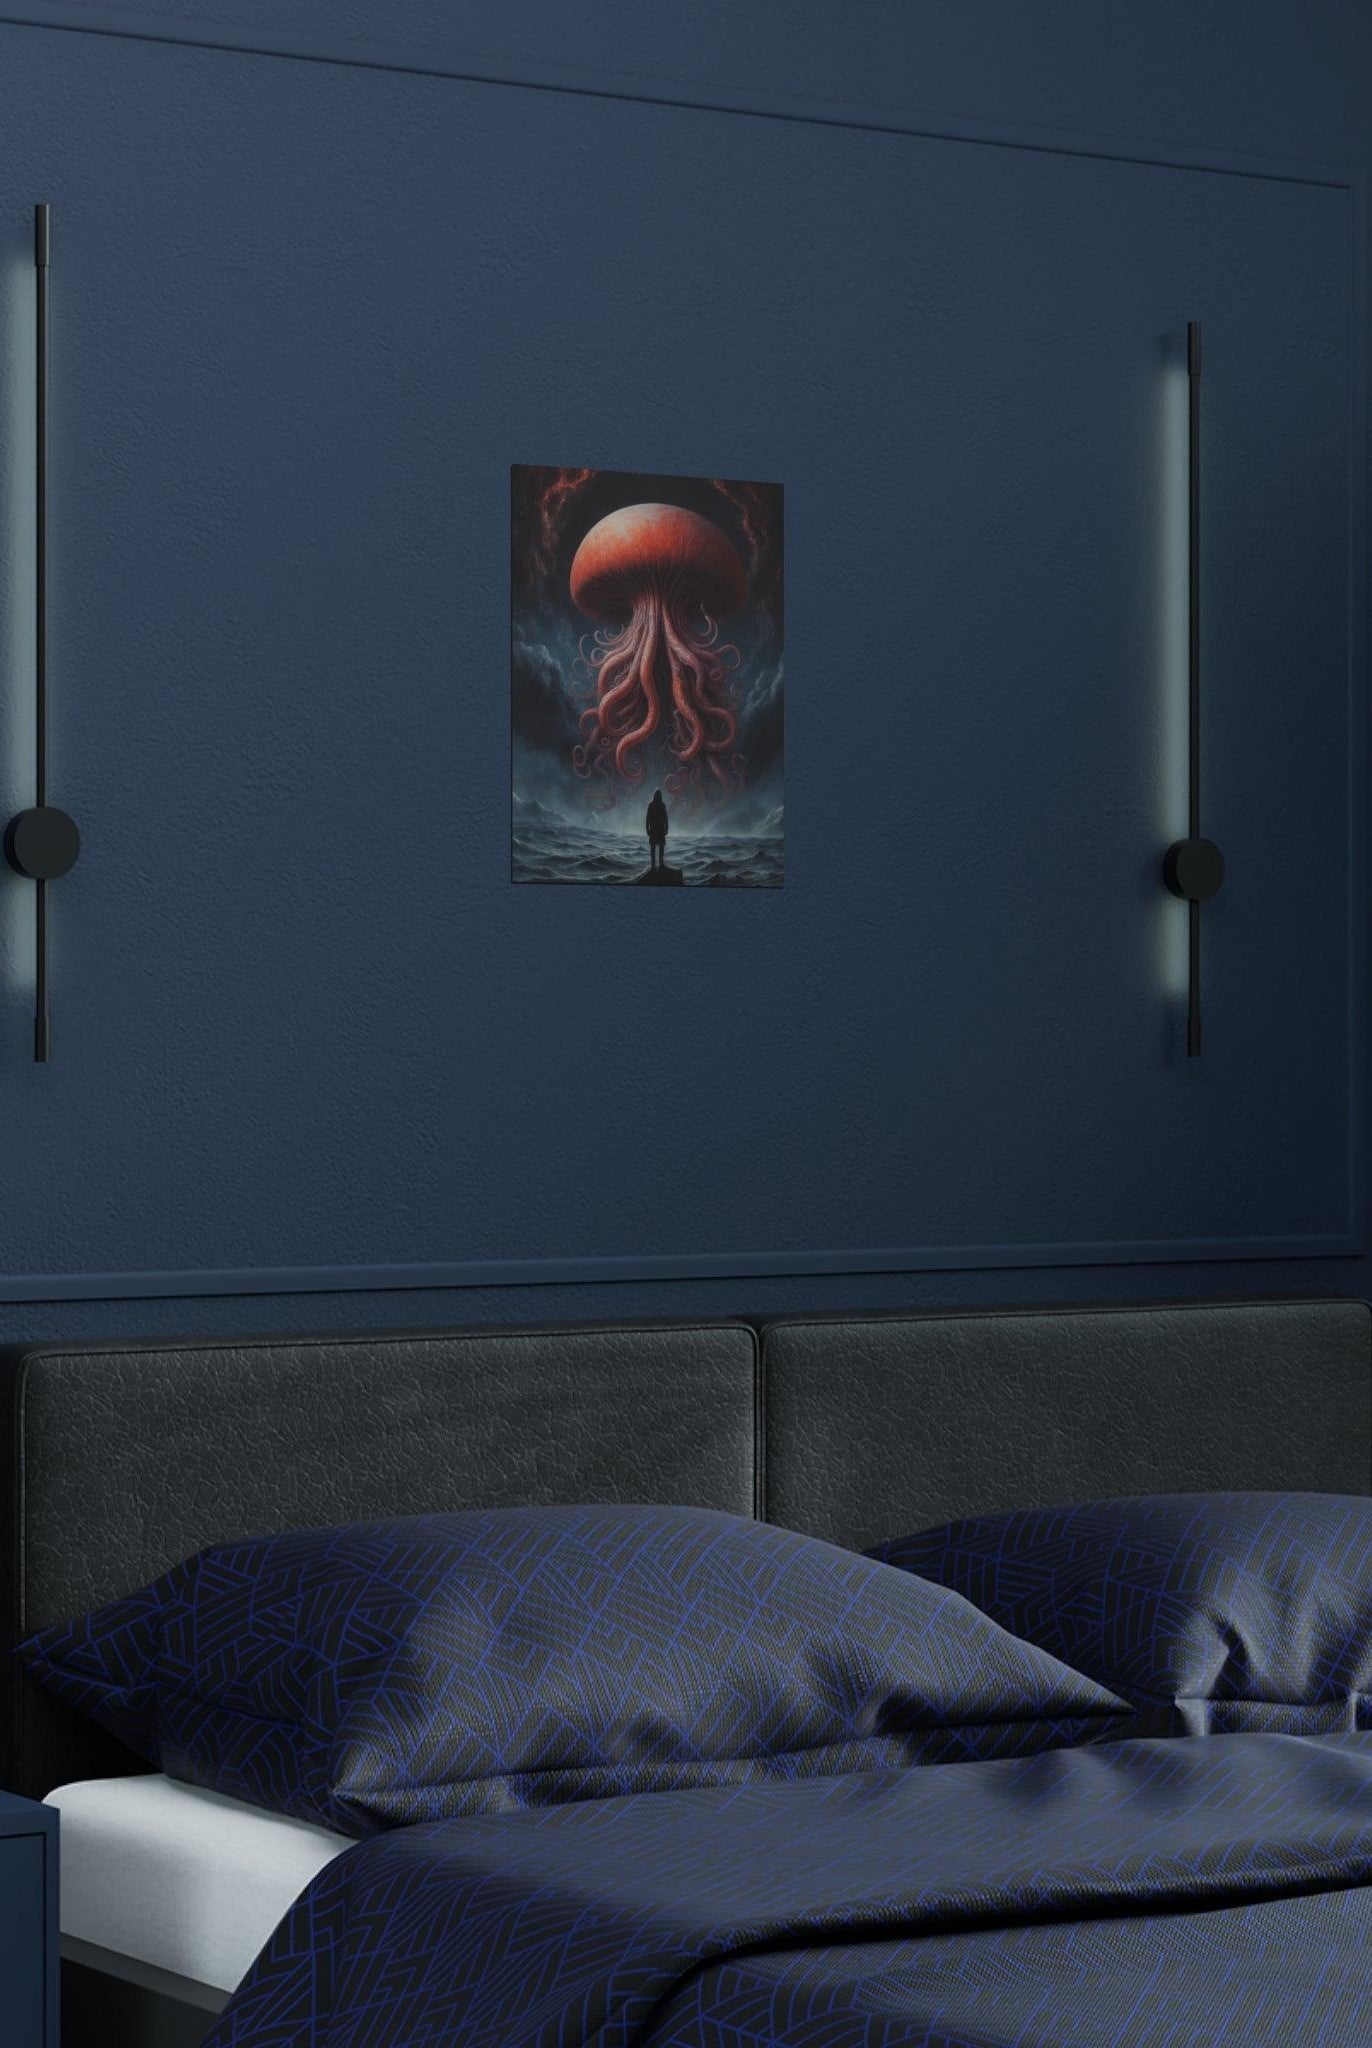 Monsters of the Ocean are Extraterrestrials - Satin Posters - Soulshinecreators